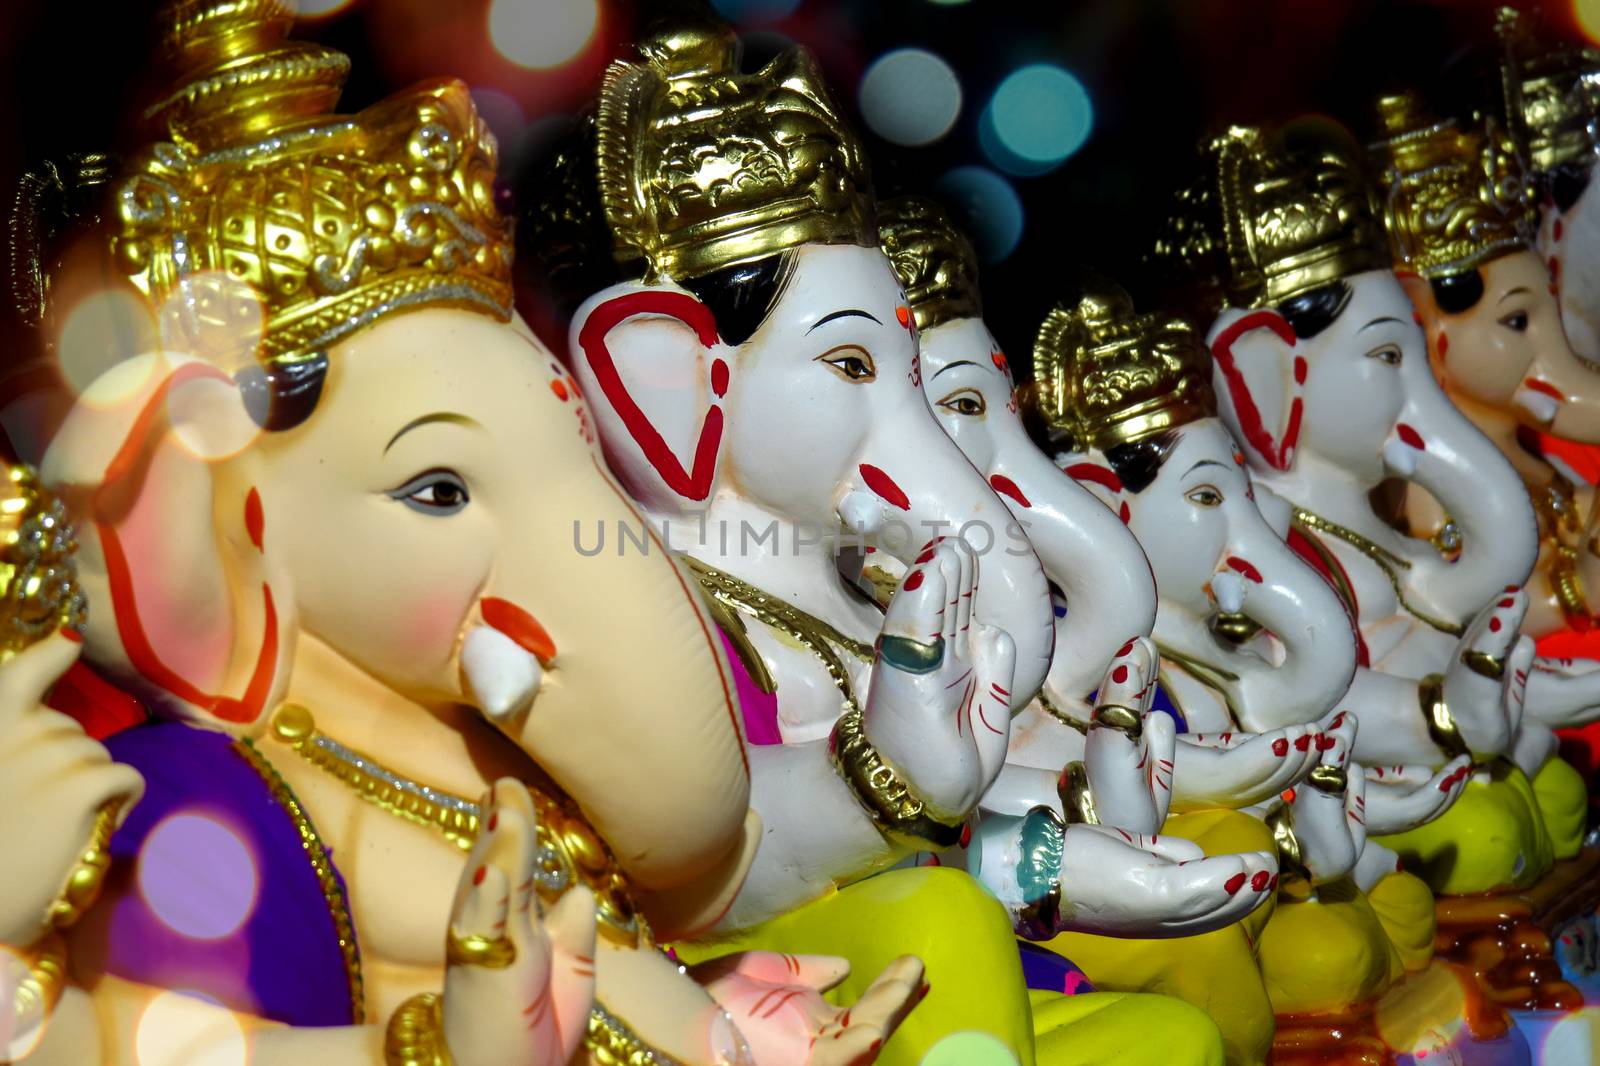 Ganesha Idols with different moods and poses for sale during Gan by thefinalmiracle